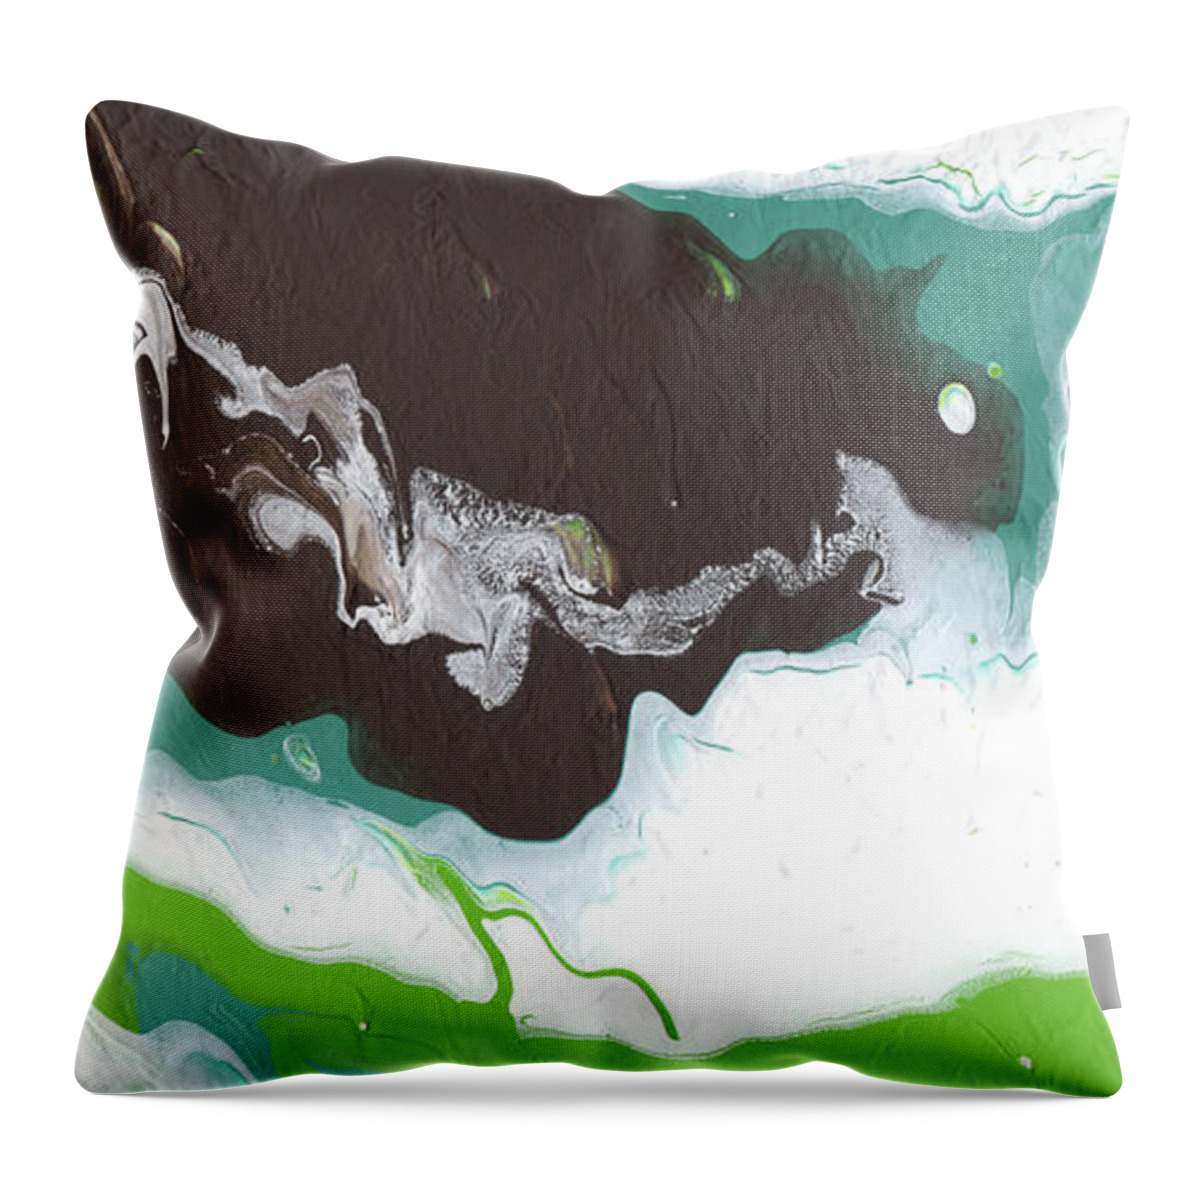 Green Throw Pillow featuring the mixed media Coffee Bean 2- Abstract Art by Linda Woods by Linda Woods